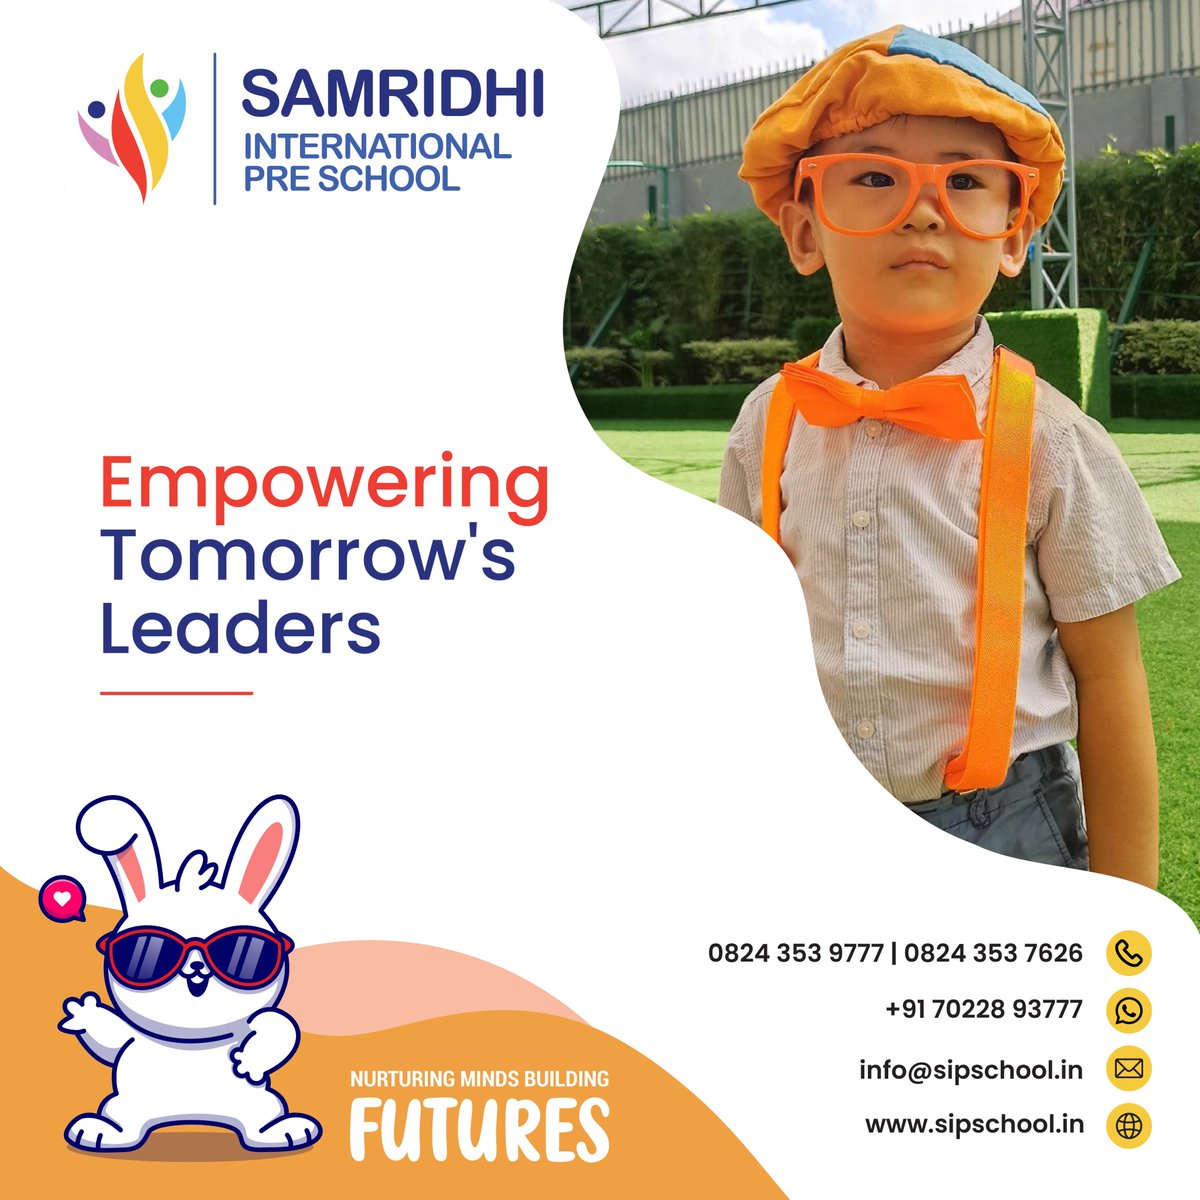 We focus on leadership qualities from a young age, empowering our students to become confident, compassionate leaders of tomorrow!

Join the leadership journey today!

#CuriosityToCreativity #ShineBright #NurturingYoungMinds #PassionForProgress #FutureLeaders #SamridhiPride